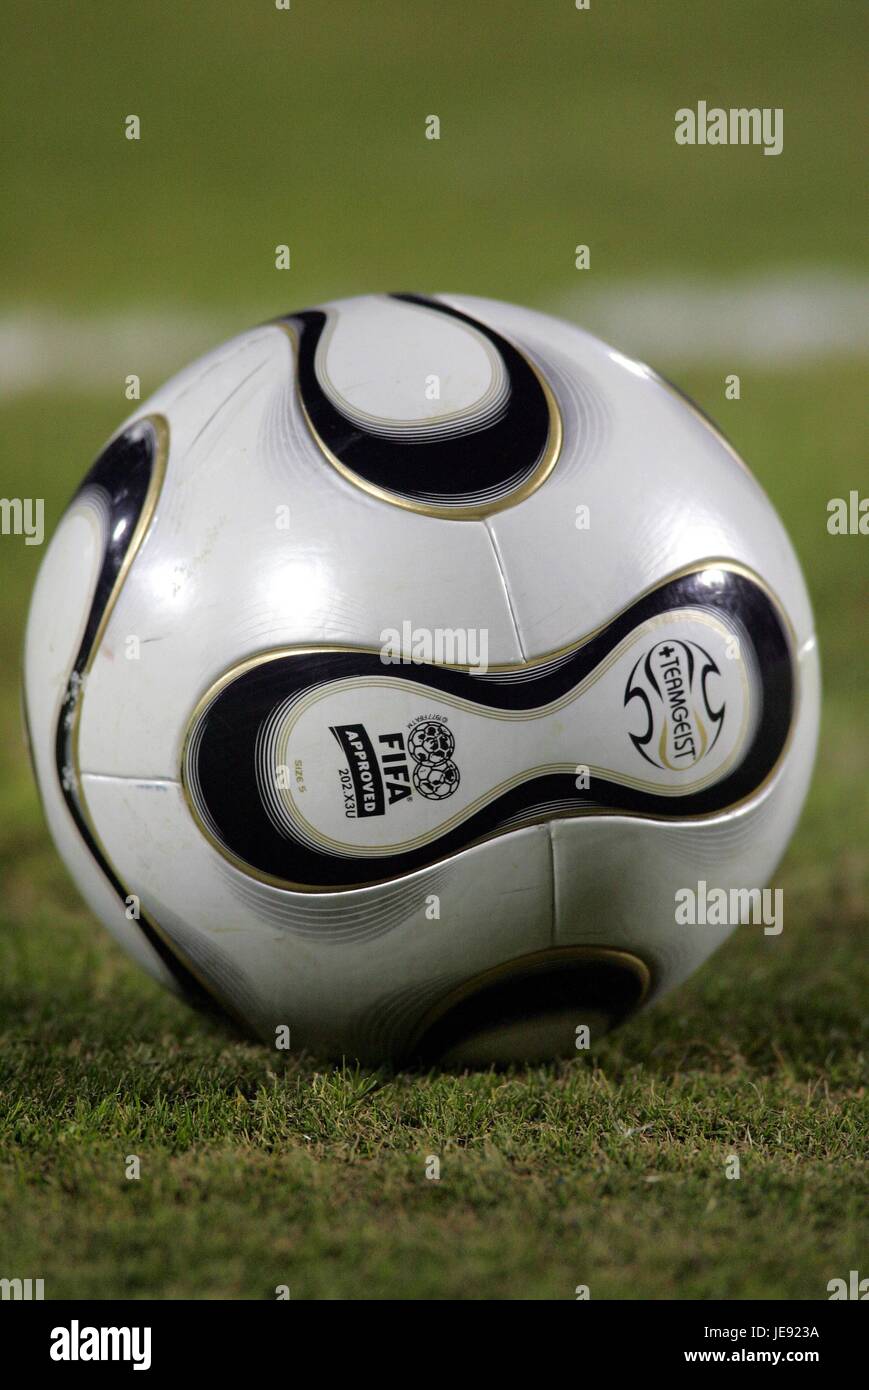 OFFICAL MATCHBALL AFRICAN NATIONS 2006 CAIRO EGYPT 24 January 2006 Stock Photo